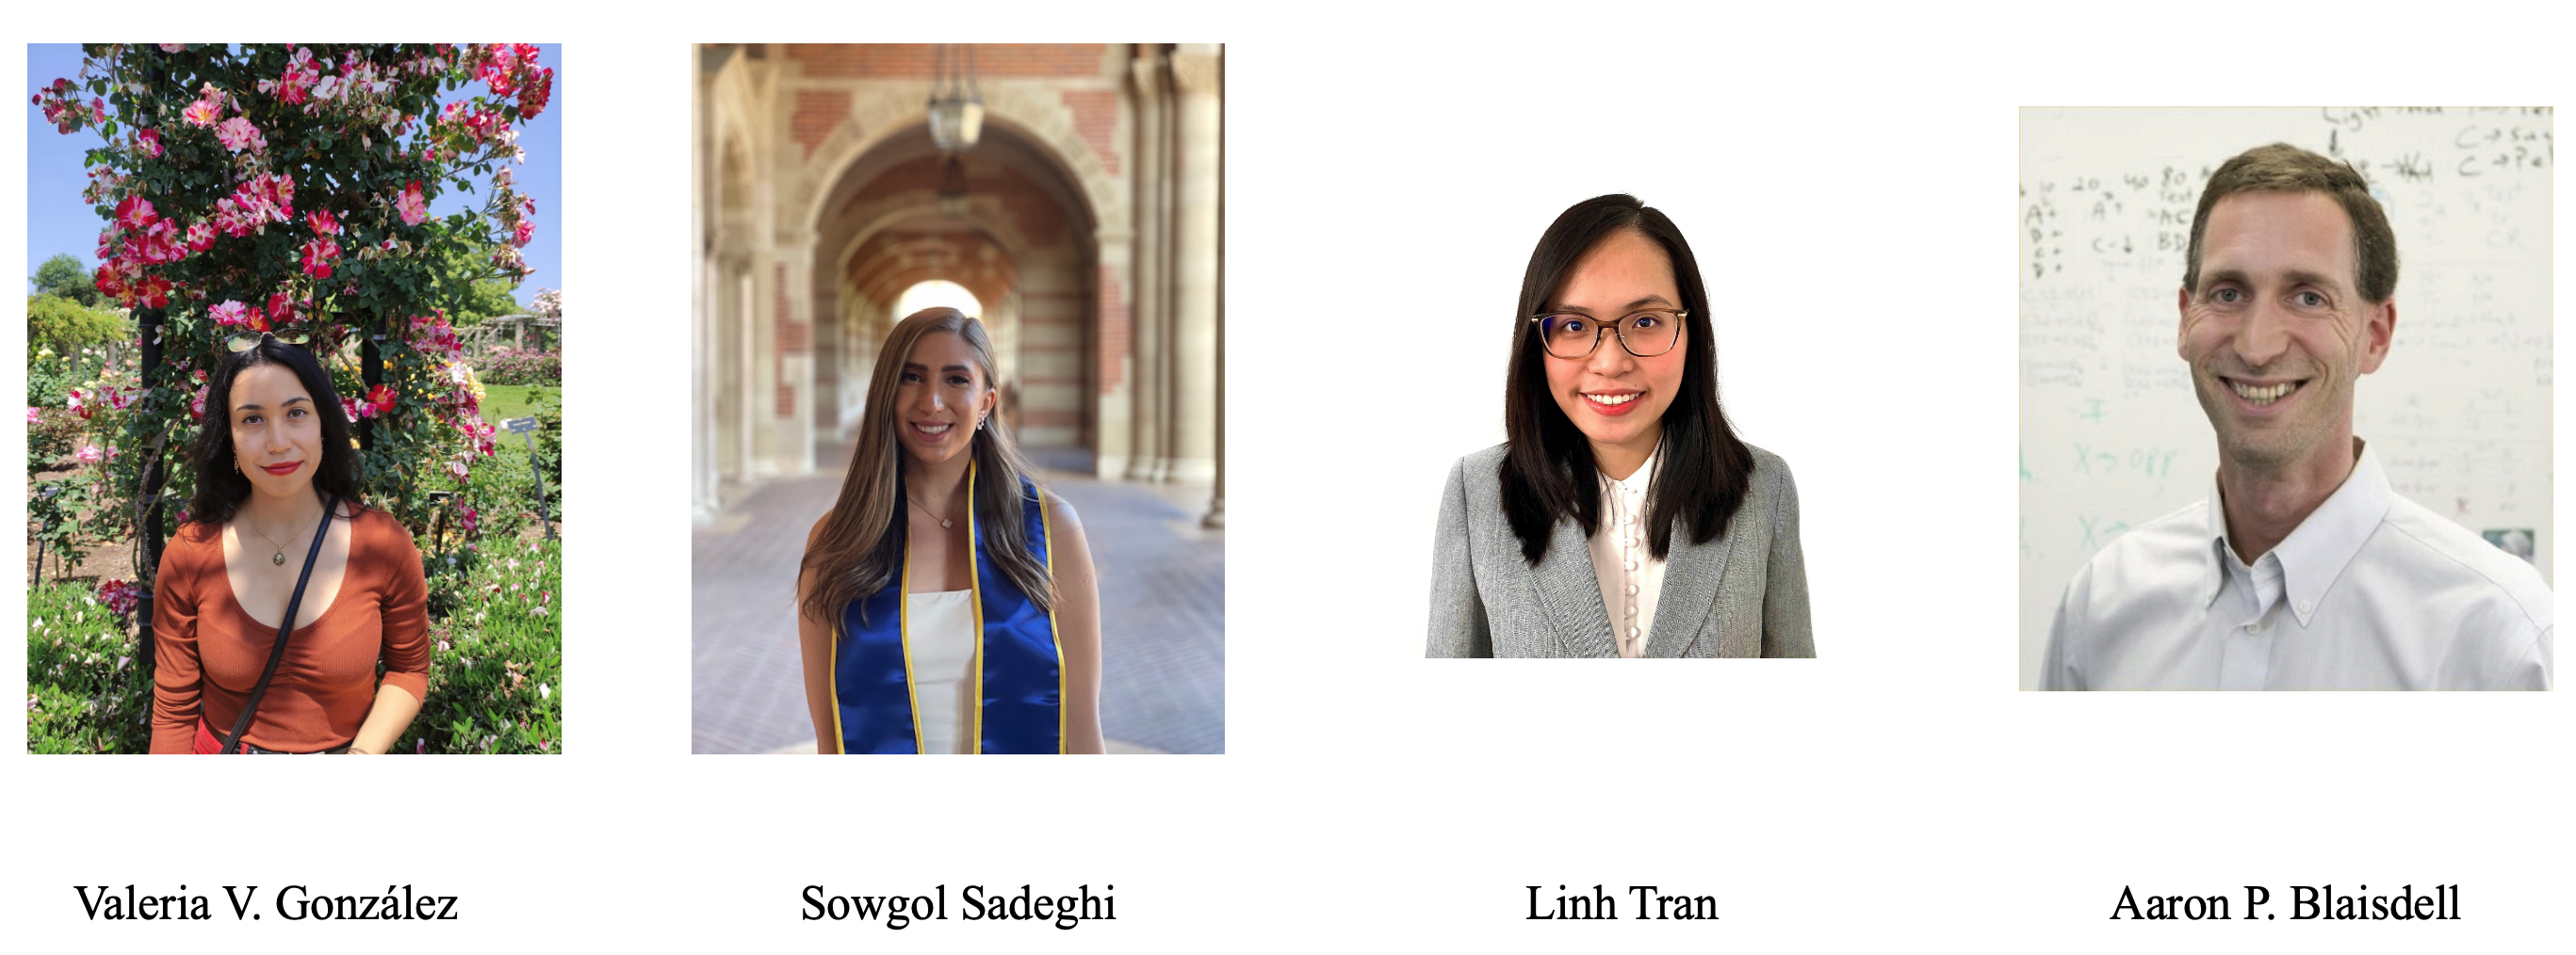 Images of the authors of the featured article. Pictured from left to right: Valeria V. González, Sowgol Sadeghi, Linh Tran & Aaron P. Blaisdell